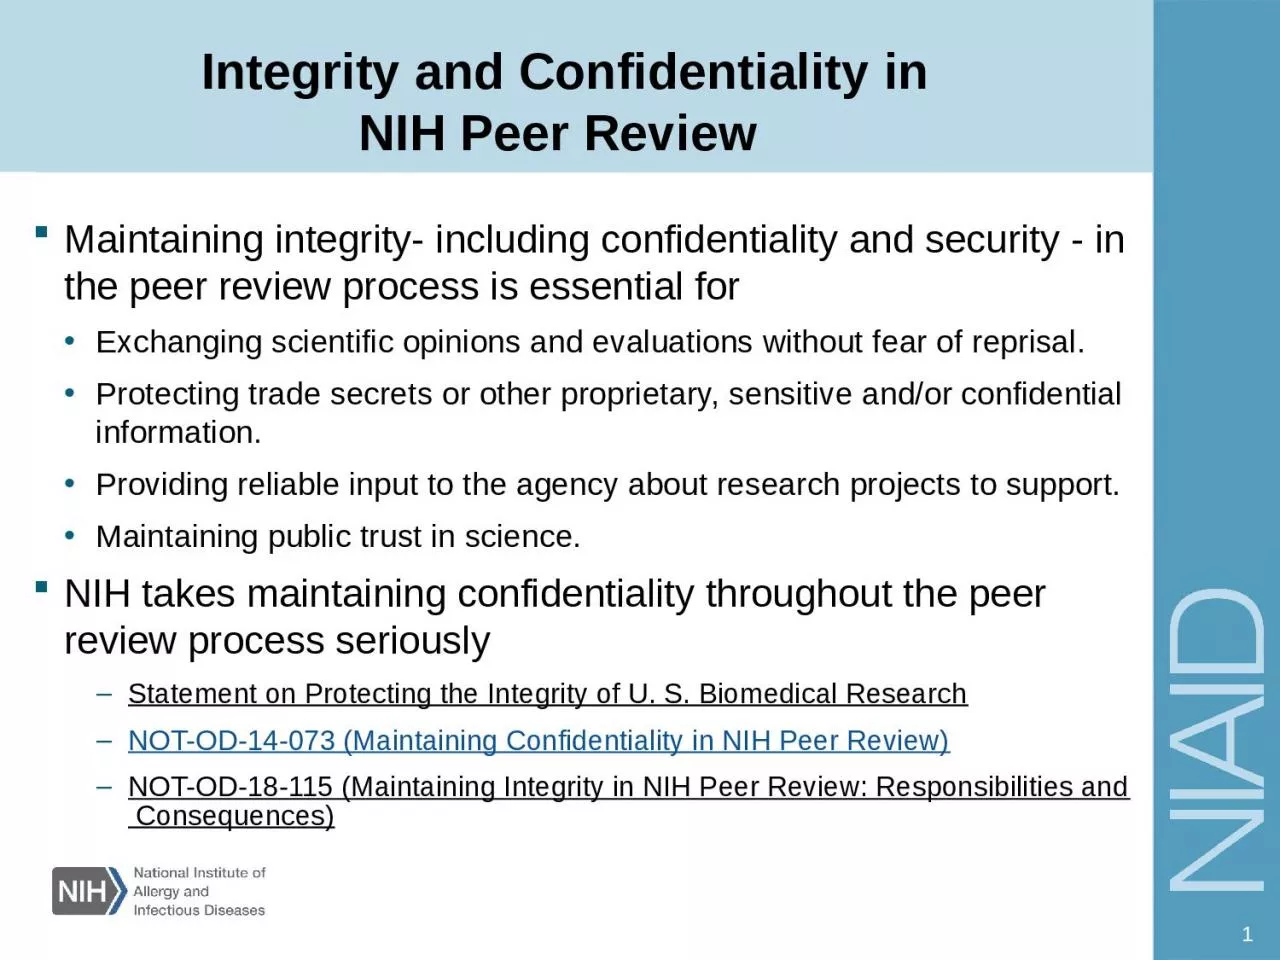 Integrity and Confidentiality in NIH Peer Review